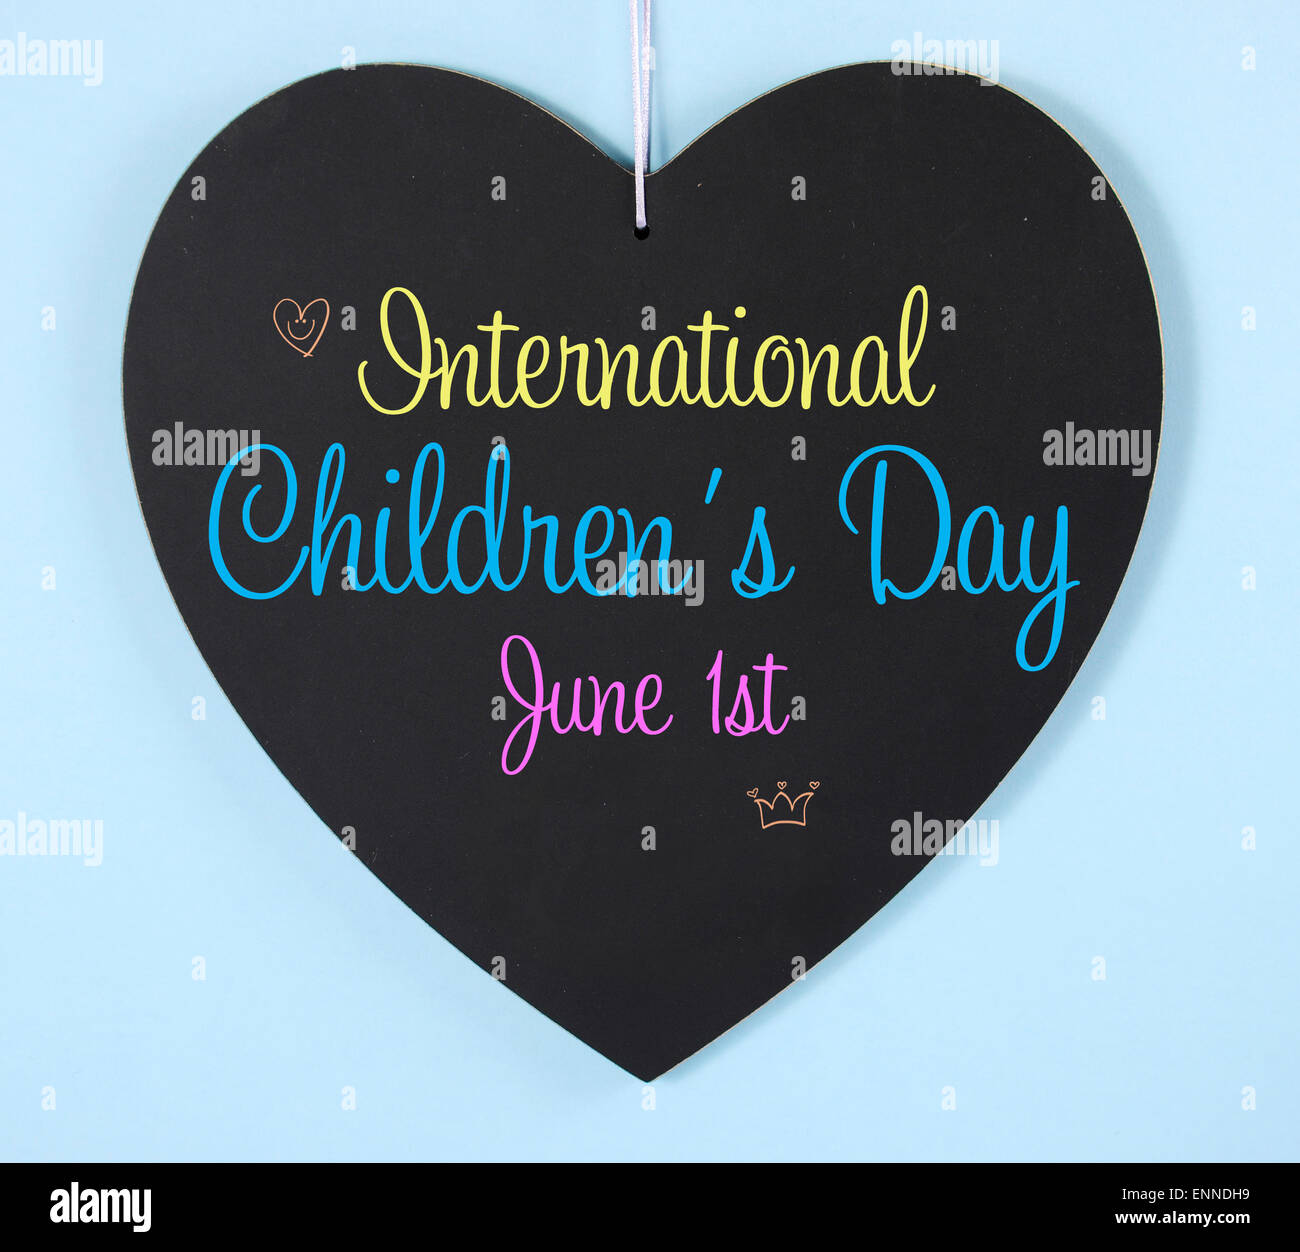 International Childrens Day message greeting on heart shape blackboard sign on pale blue background. Stock Photo